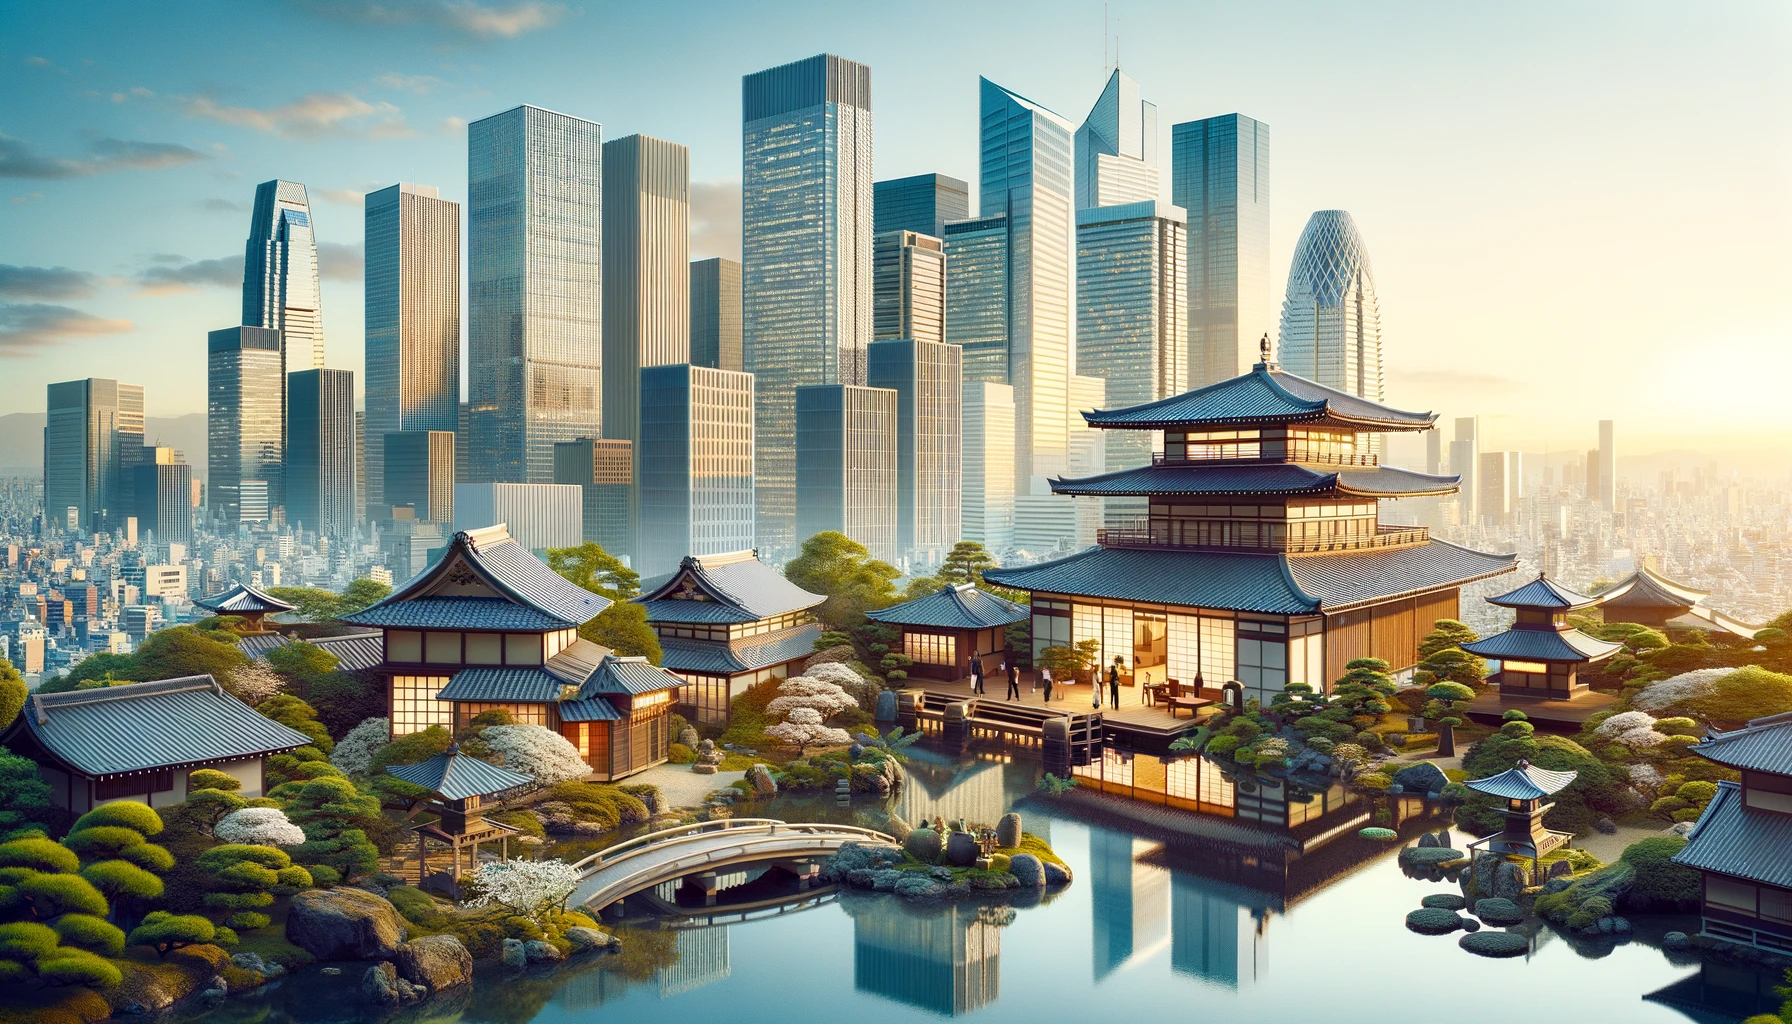 Image showing a blend of Japanese corporate skyscrapers and traditional Japanese elements, symbolizing the fusion of modern business practices with traditional culture in Japan